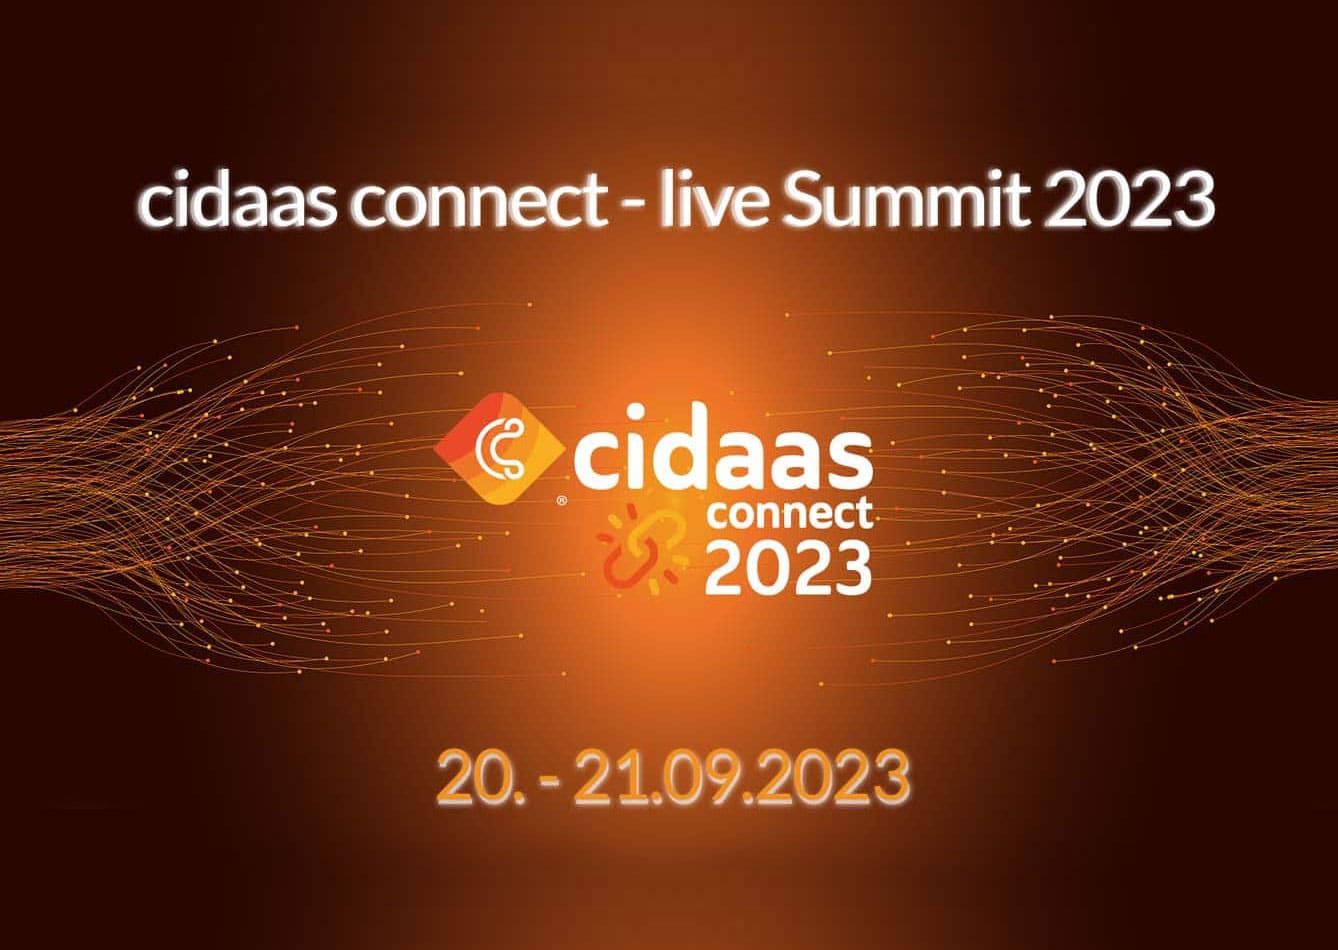 cidaas connect - live Summit 2023, the first live event at Europa-Park - First-hand technologies and trends for the IAM and CIAM sectors